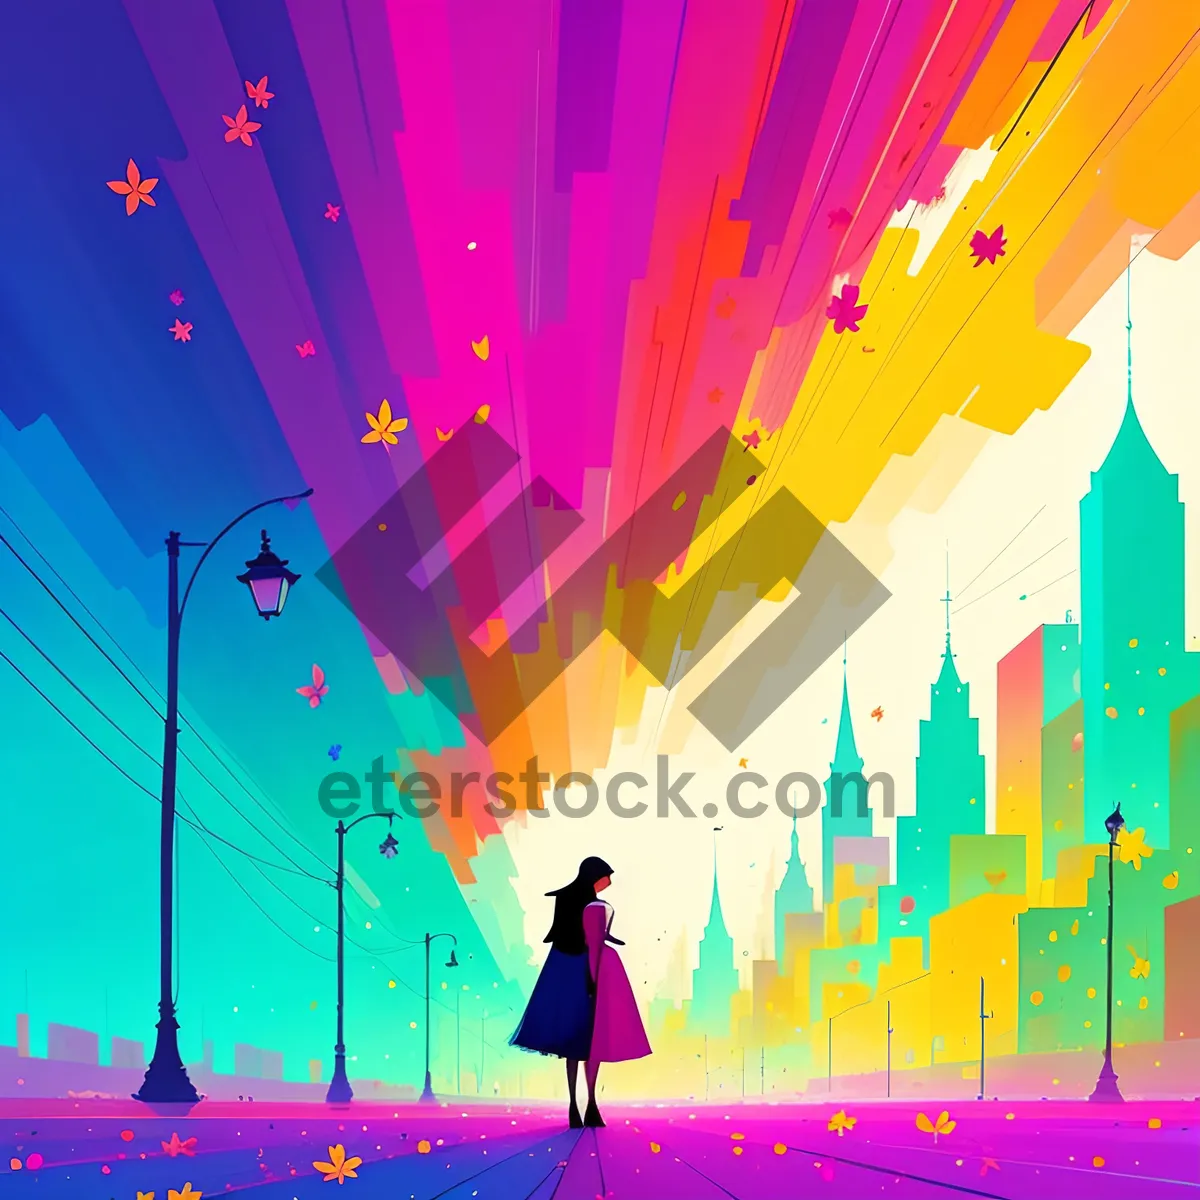 Picture of Laser Starburst: Abstract Colorful Graphic Design